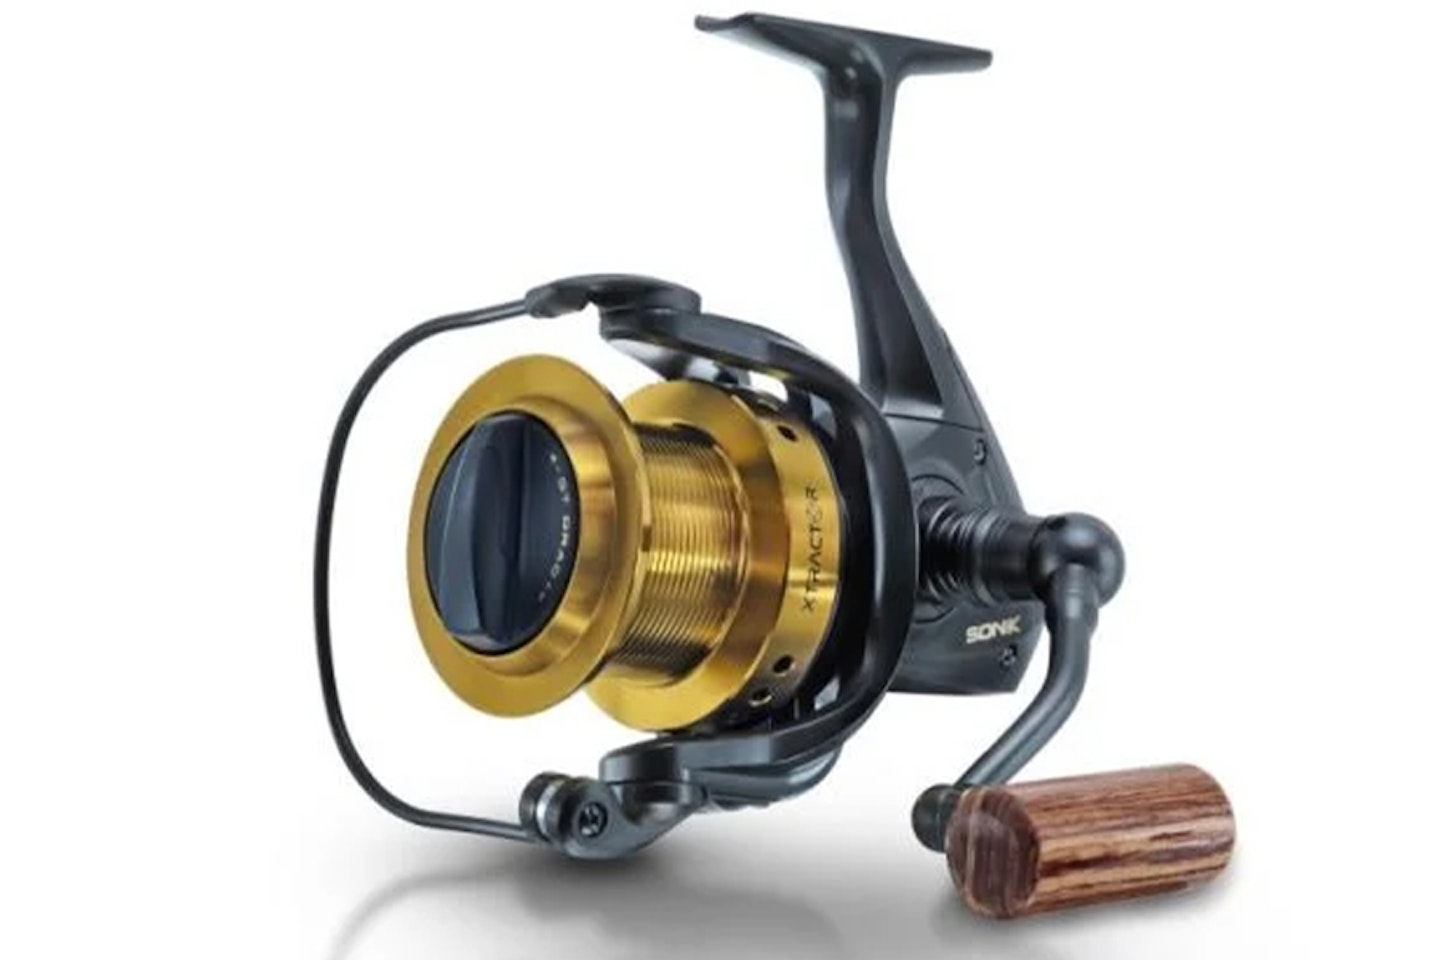 The Best Type of Reel for Coarse Fishing Beginners - Rear Drag Reels  Explained. 